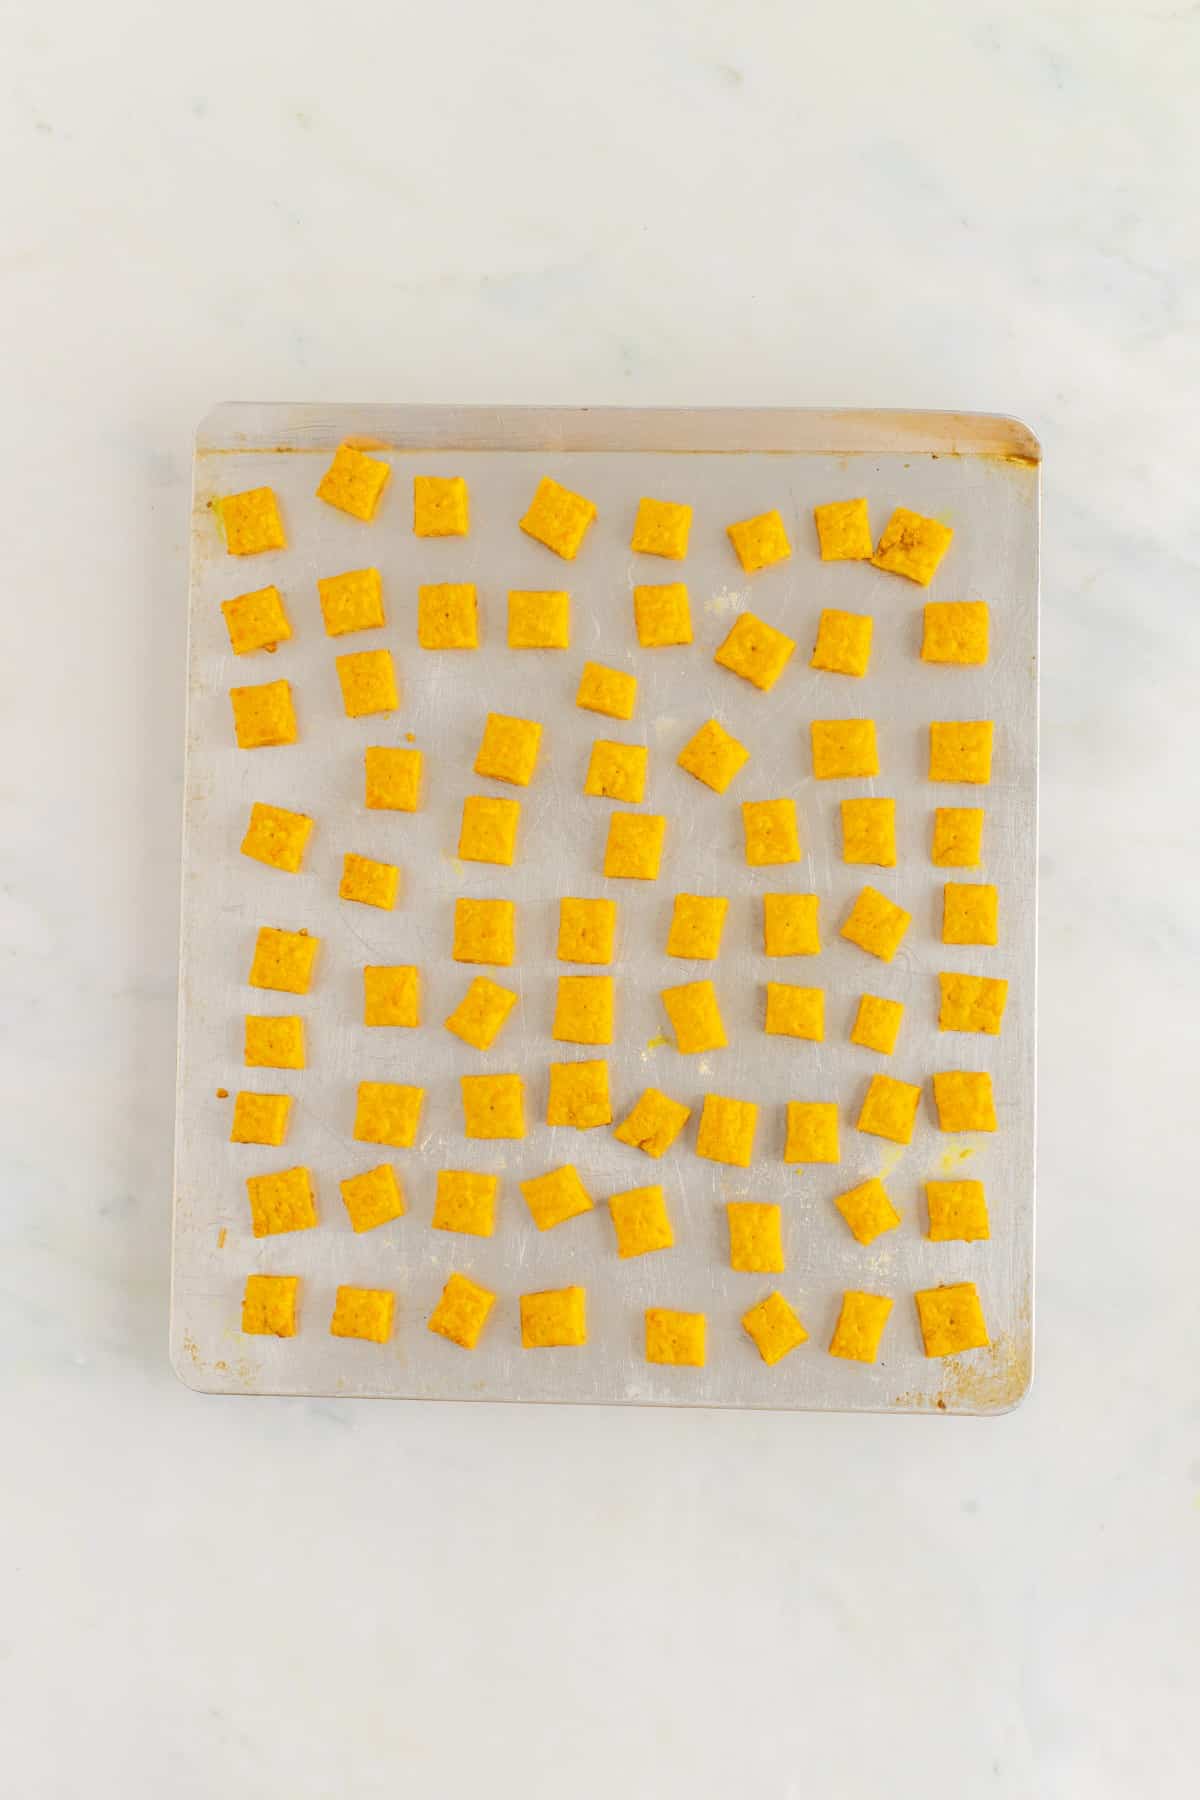 Baked Homemade Cheez-Its on a baking sheet. 